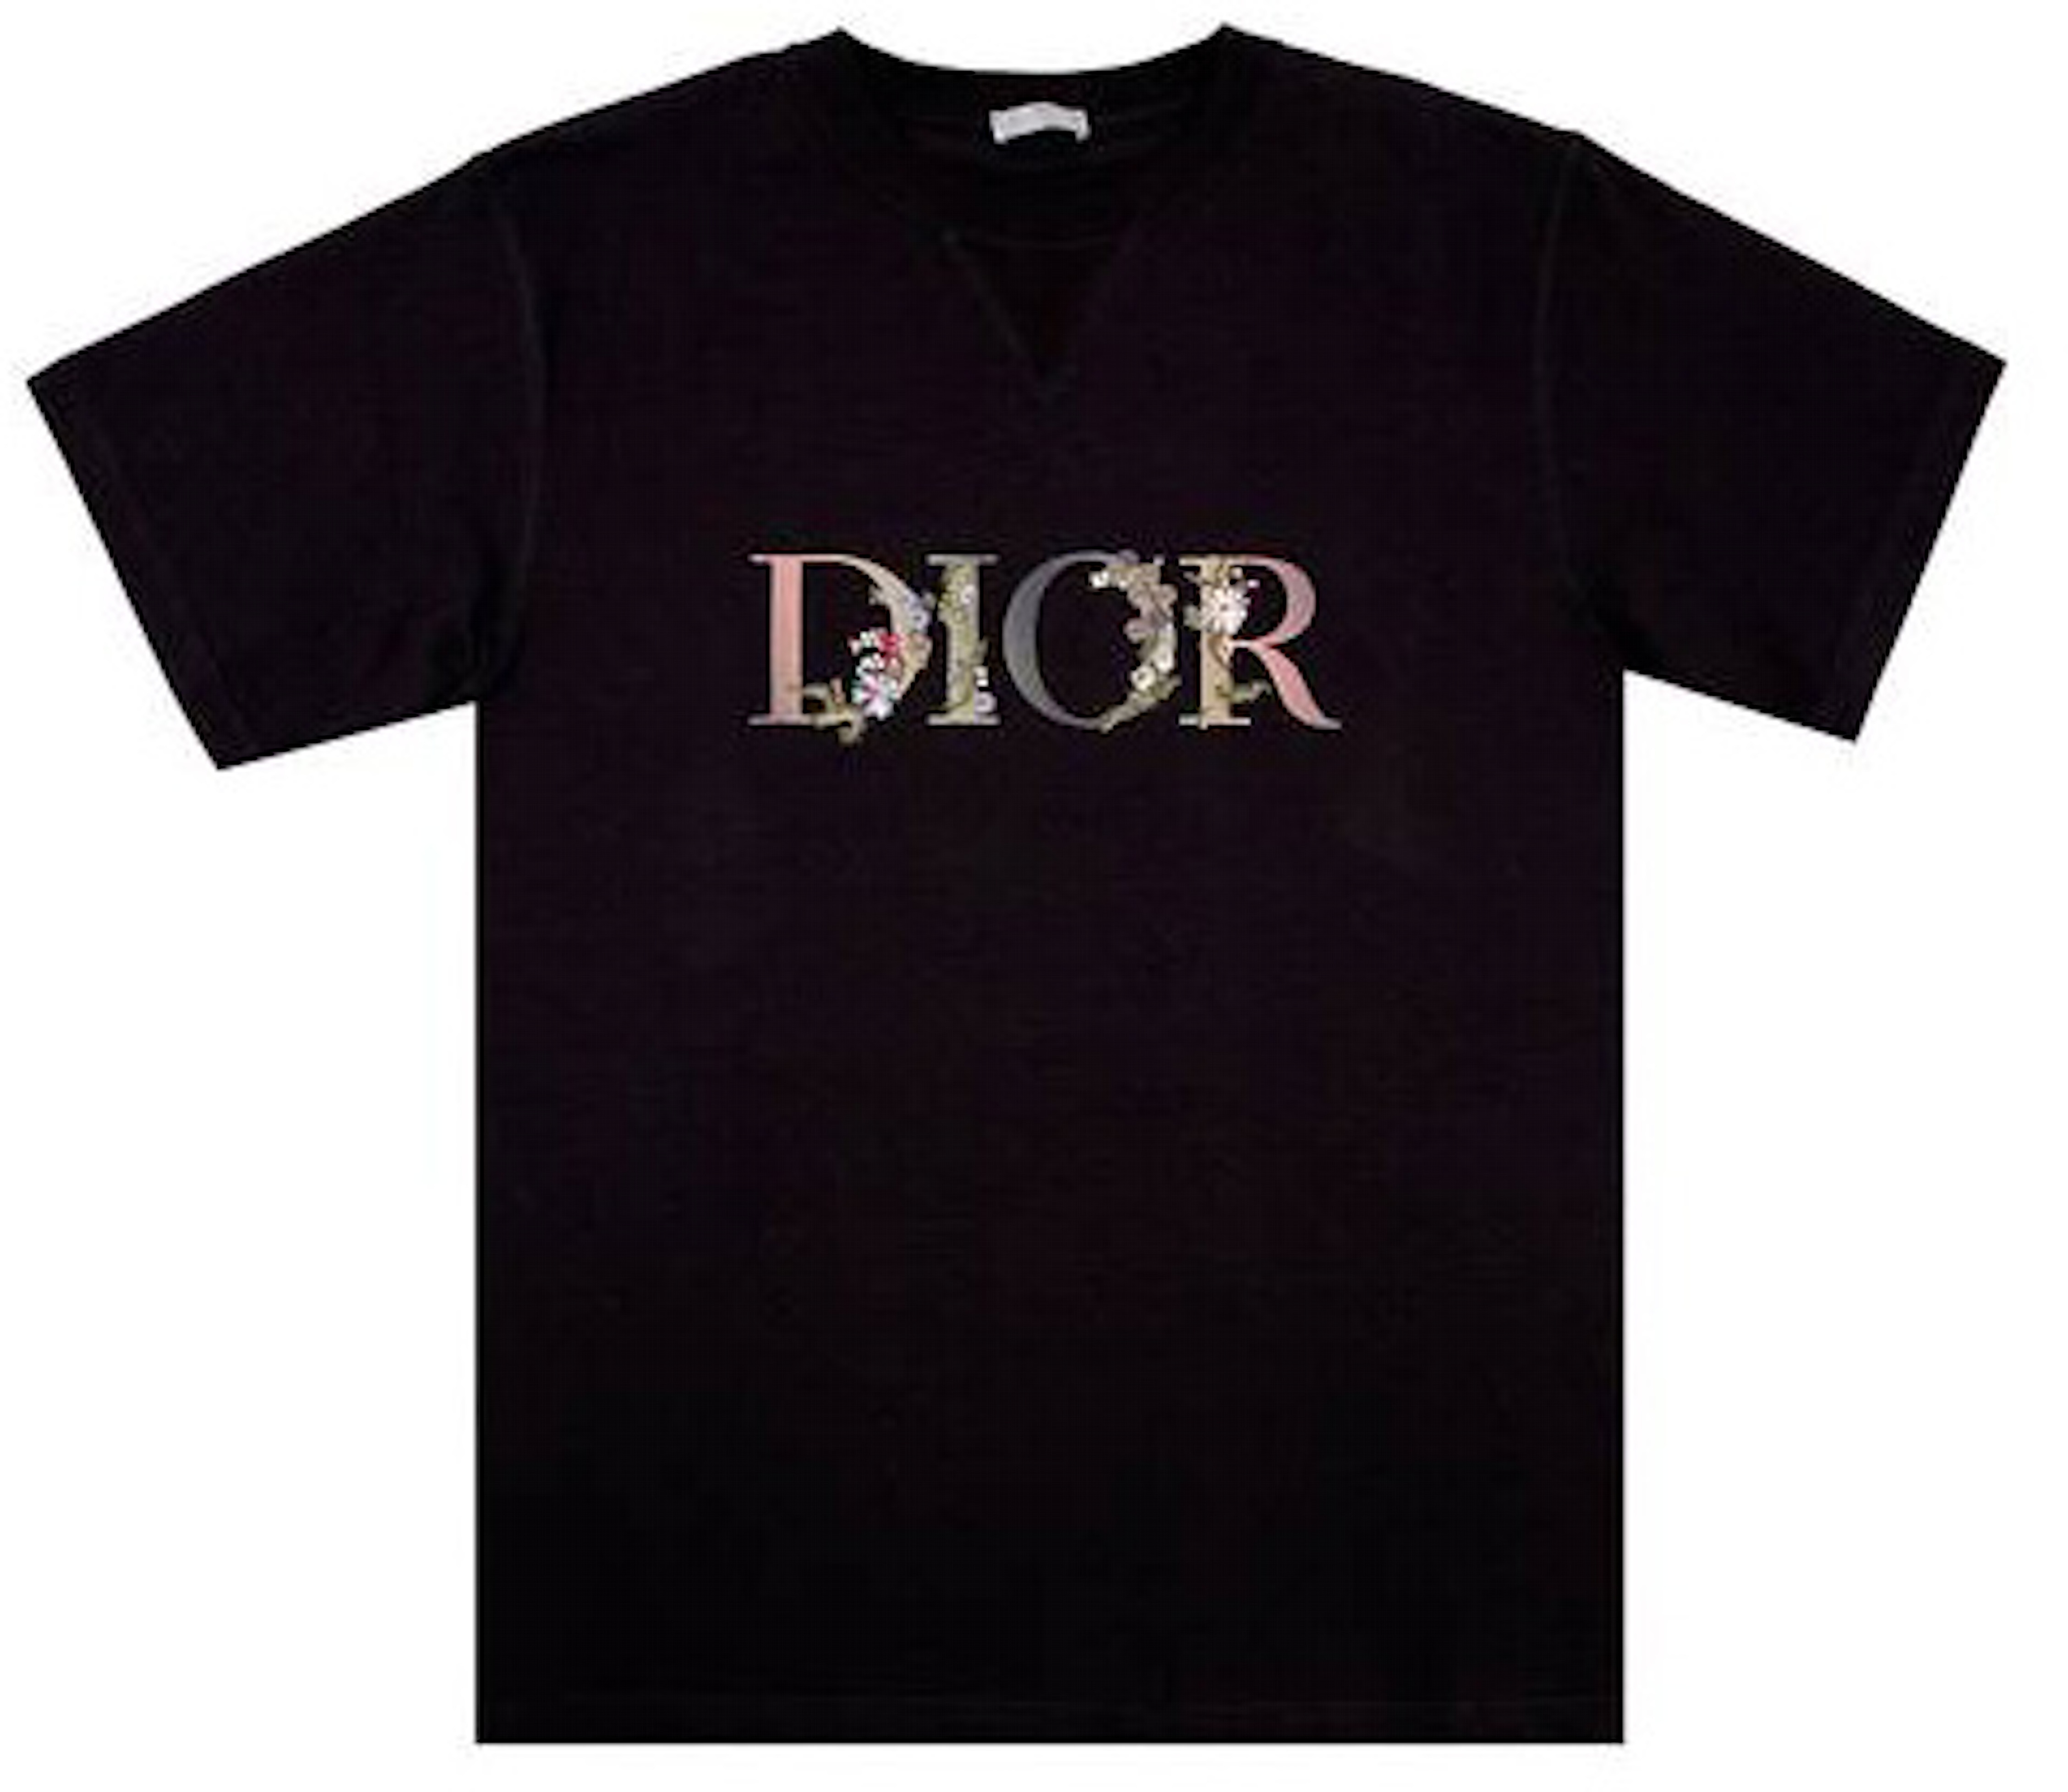 Dior Flowers Embroidered T-Shirt Black - SS21